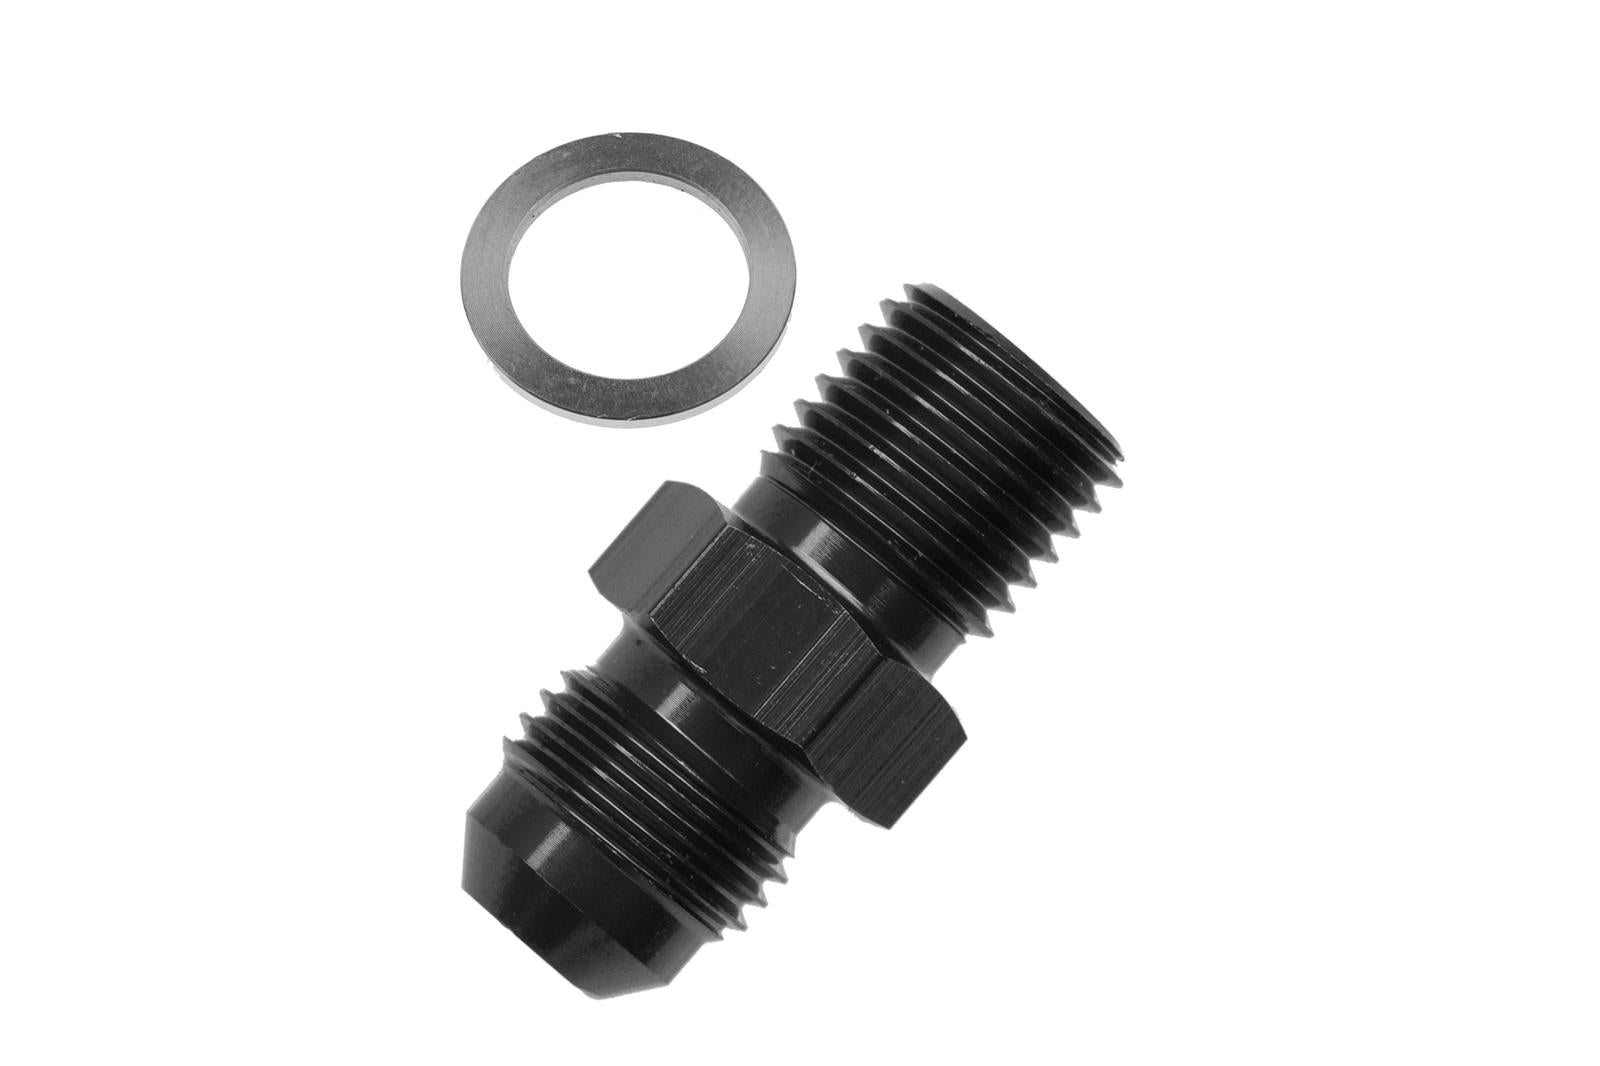 Redhorse Performance 8161-10-12-2 -10 Male AN/JIC flare to M12x1.5 inverted adapter - black